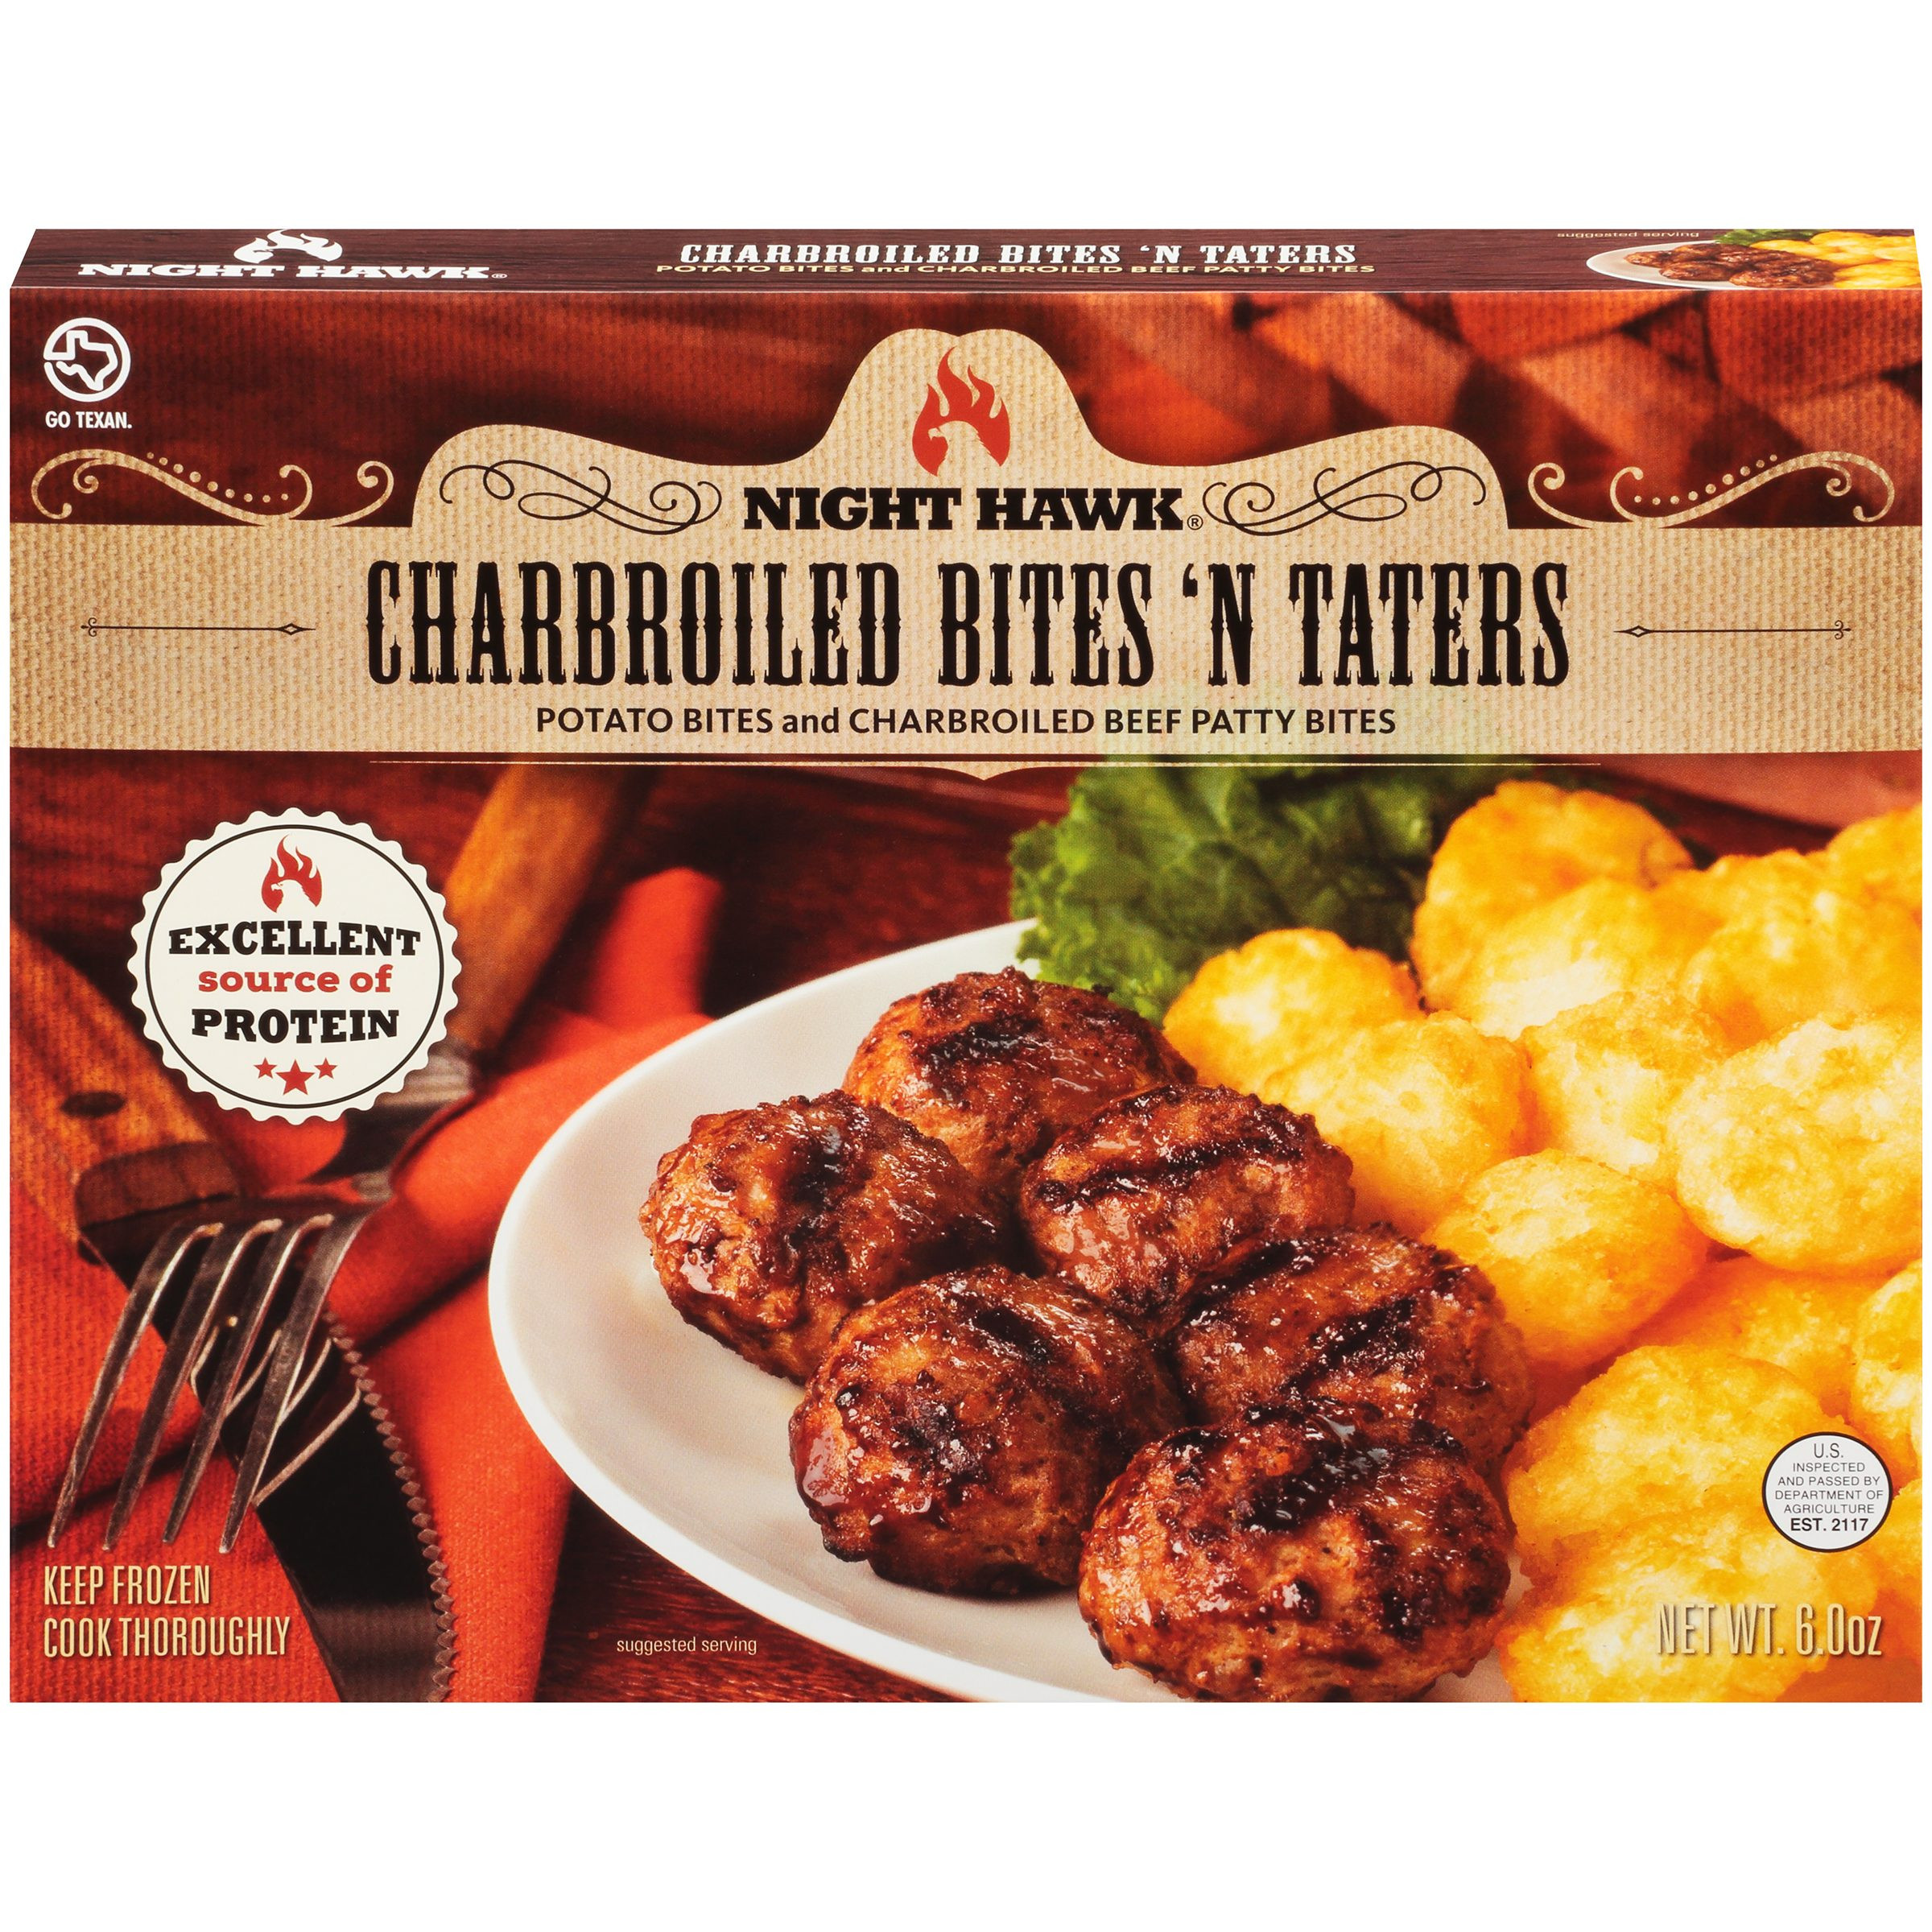 Walmart Tv Dinners Unique Healthy Tv Dinners at Walmart Swanson Classics Meatloaf